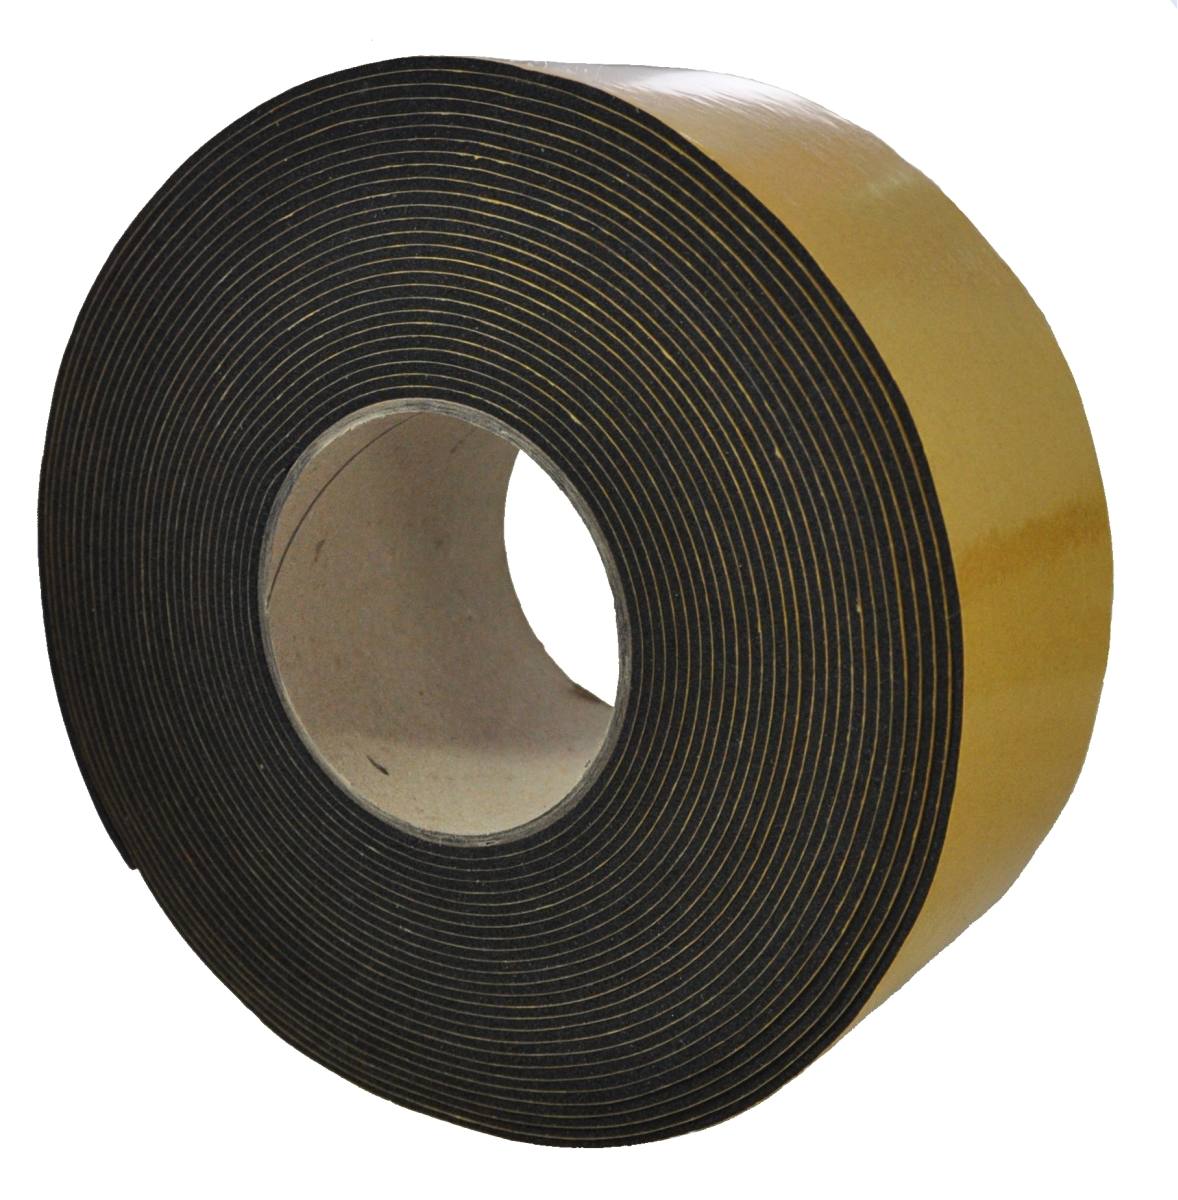 S-K-S EPDM 3mmx100mmx10m black self-adhesive on one side